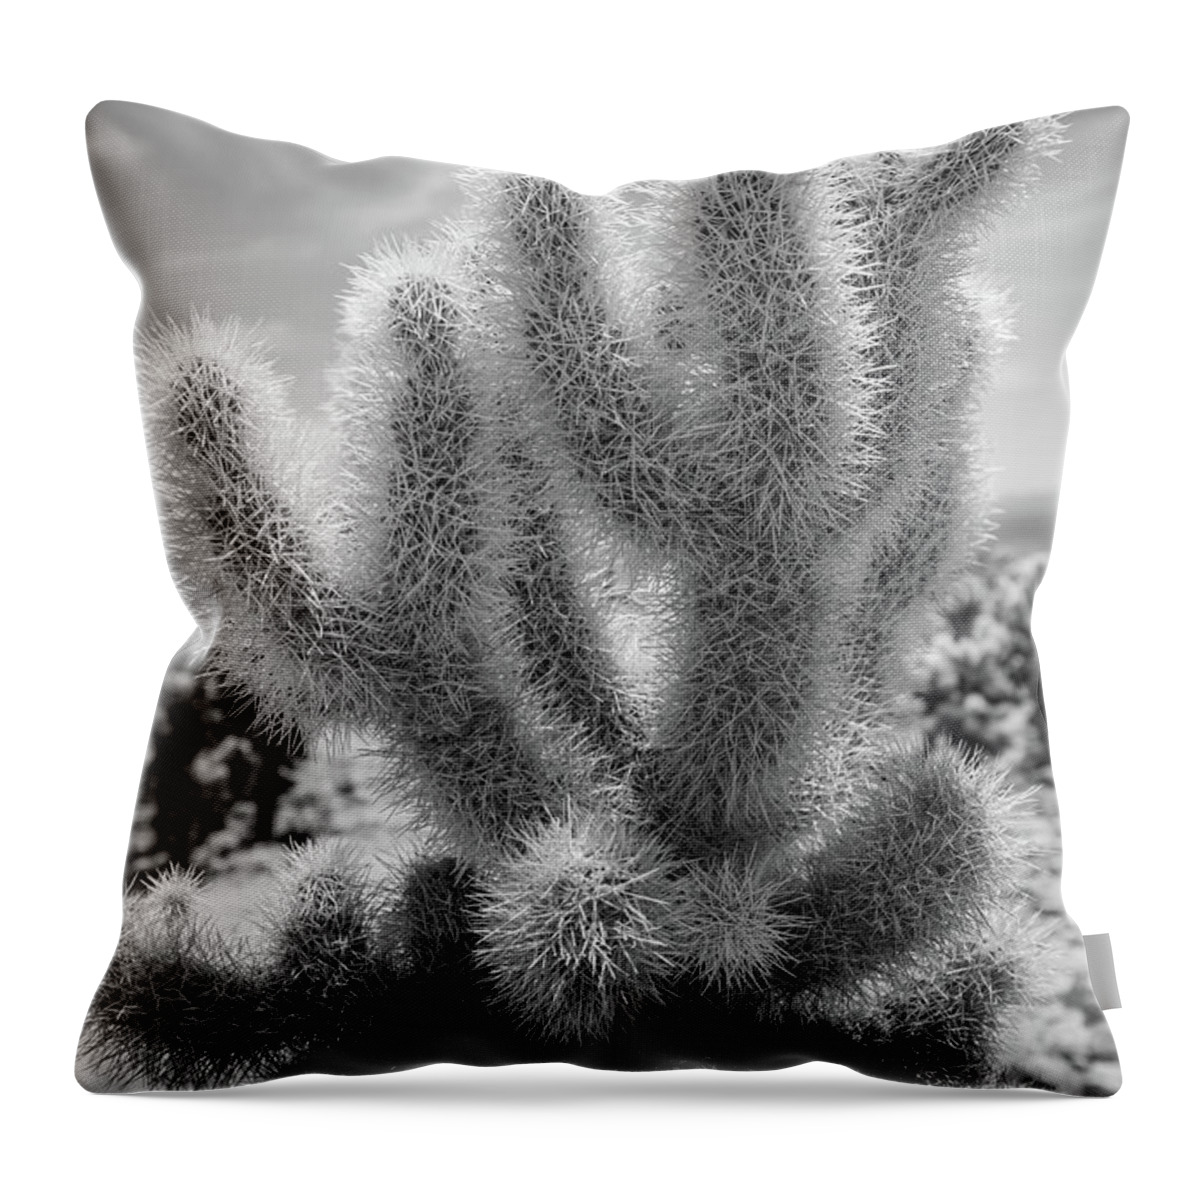 Cholla Cactus Throw Pillow featuring the photograph Cholla Cactus BW by Michael Ver Sprill